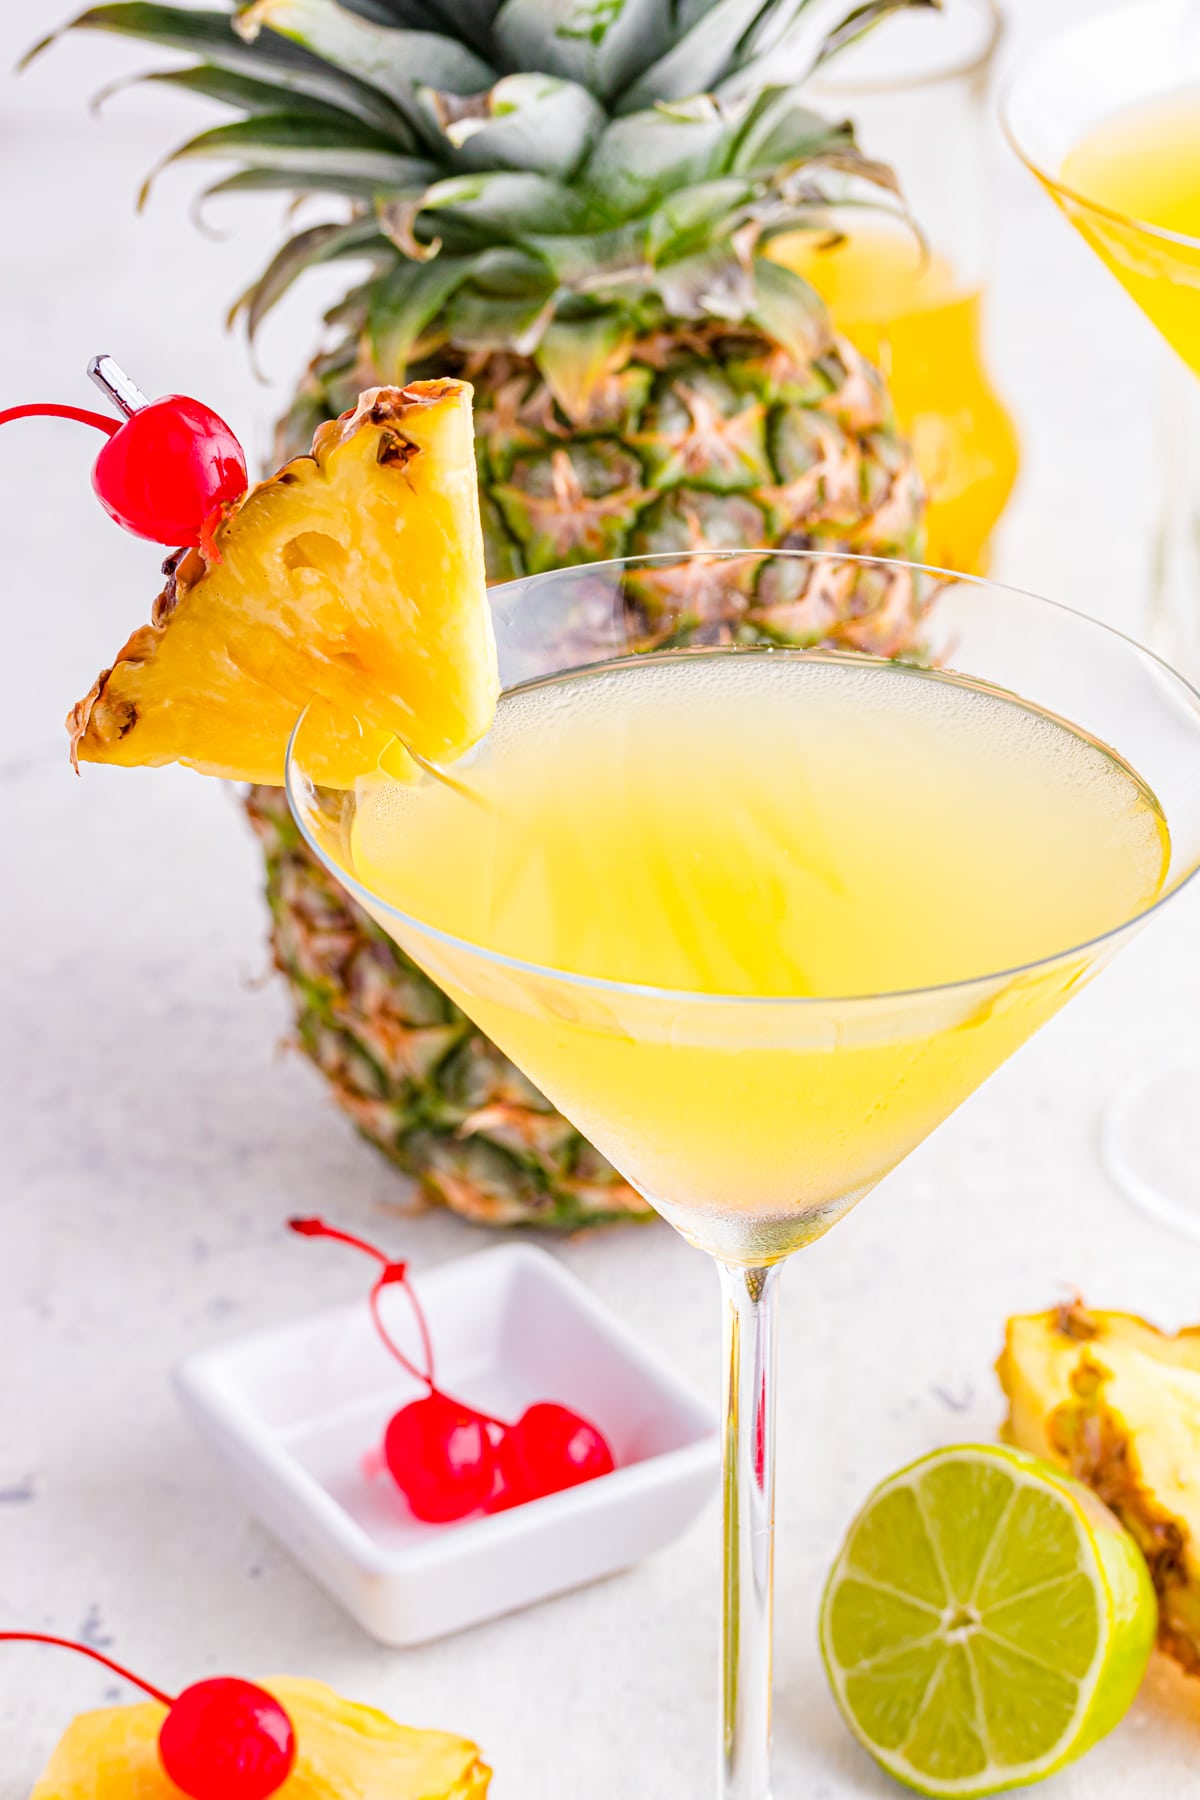 Pineapple cocktail with pineapple wedge and cherry garnish.